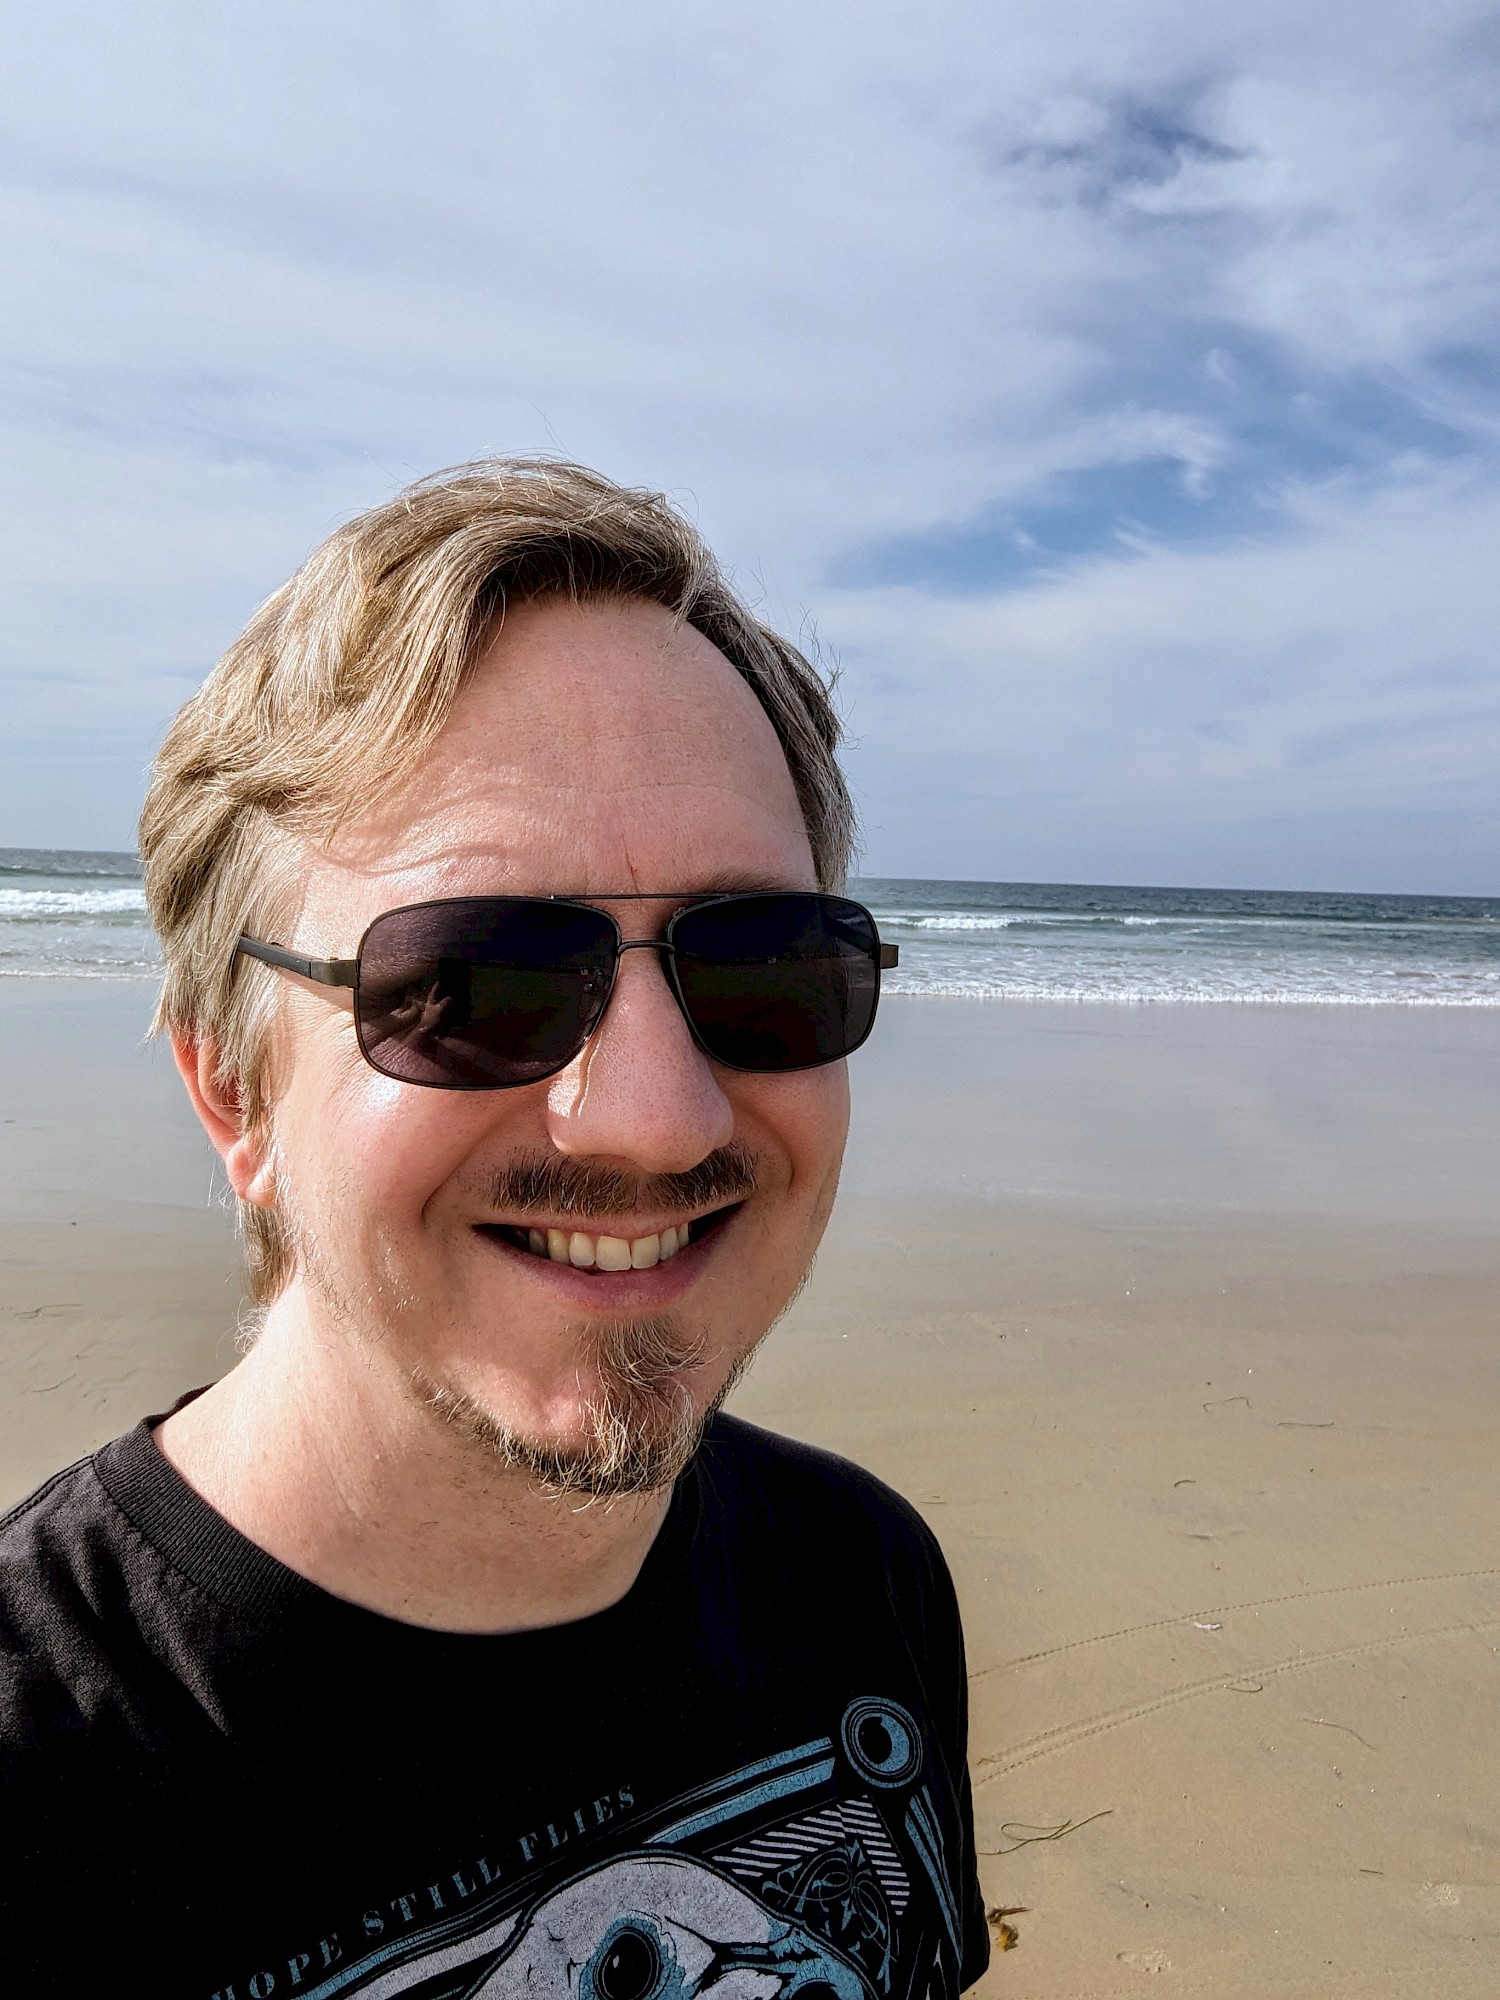 A smiling selfie at the beach with the ocean in the background. I'm wearing a black Five Iron Frenzy t-shirt with text 